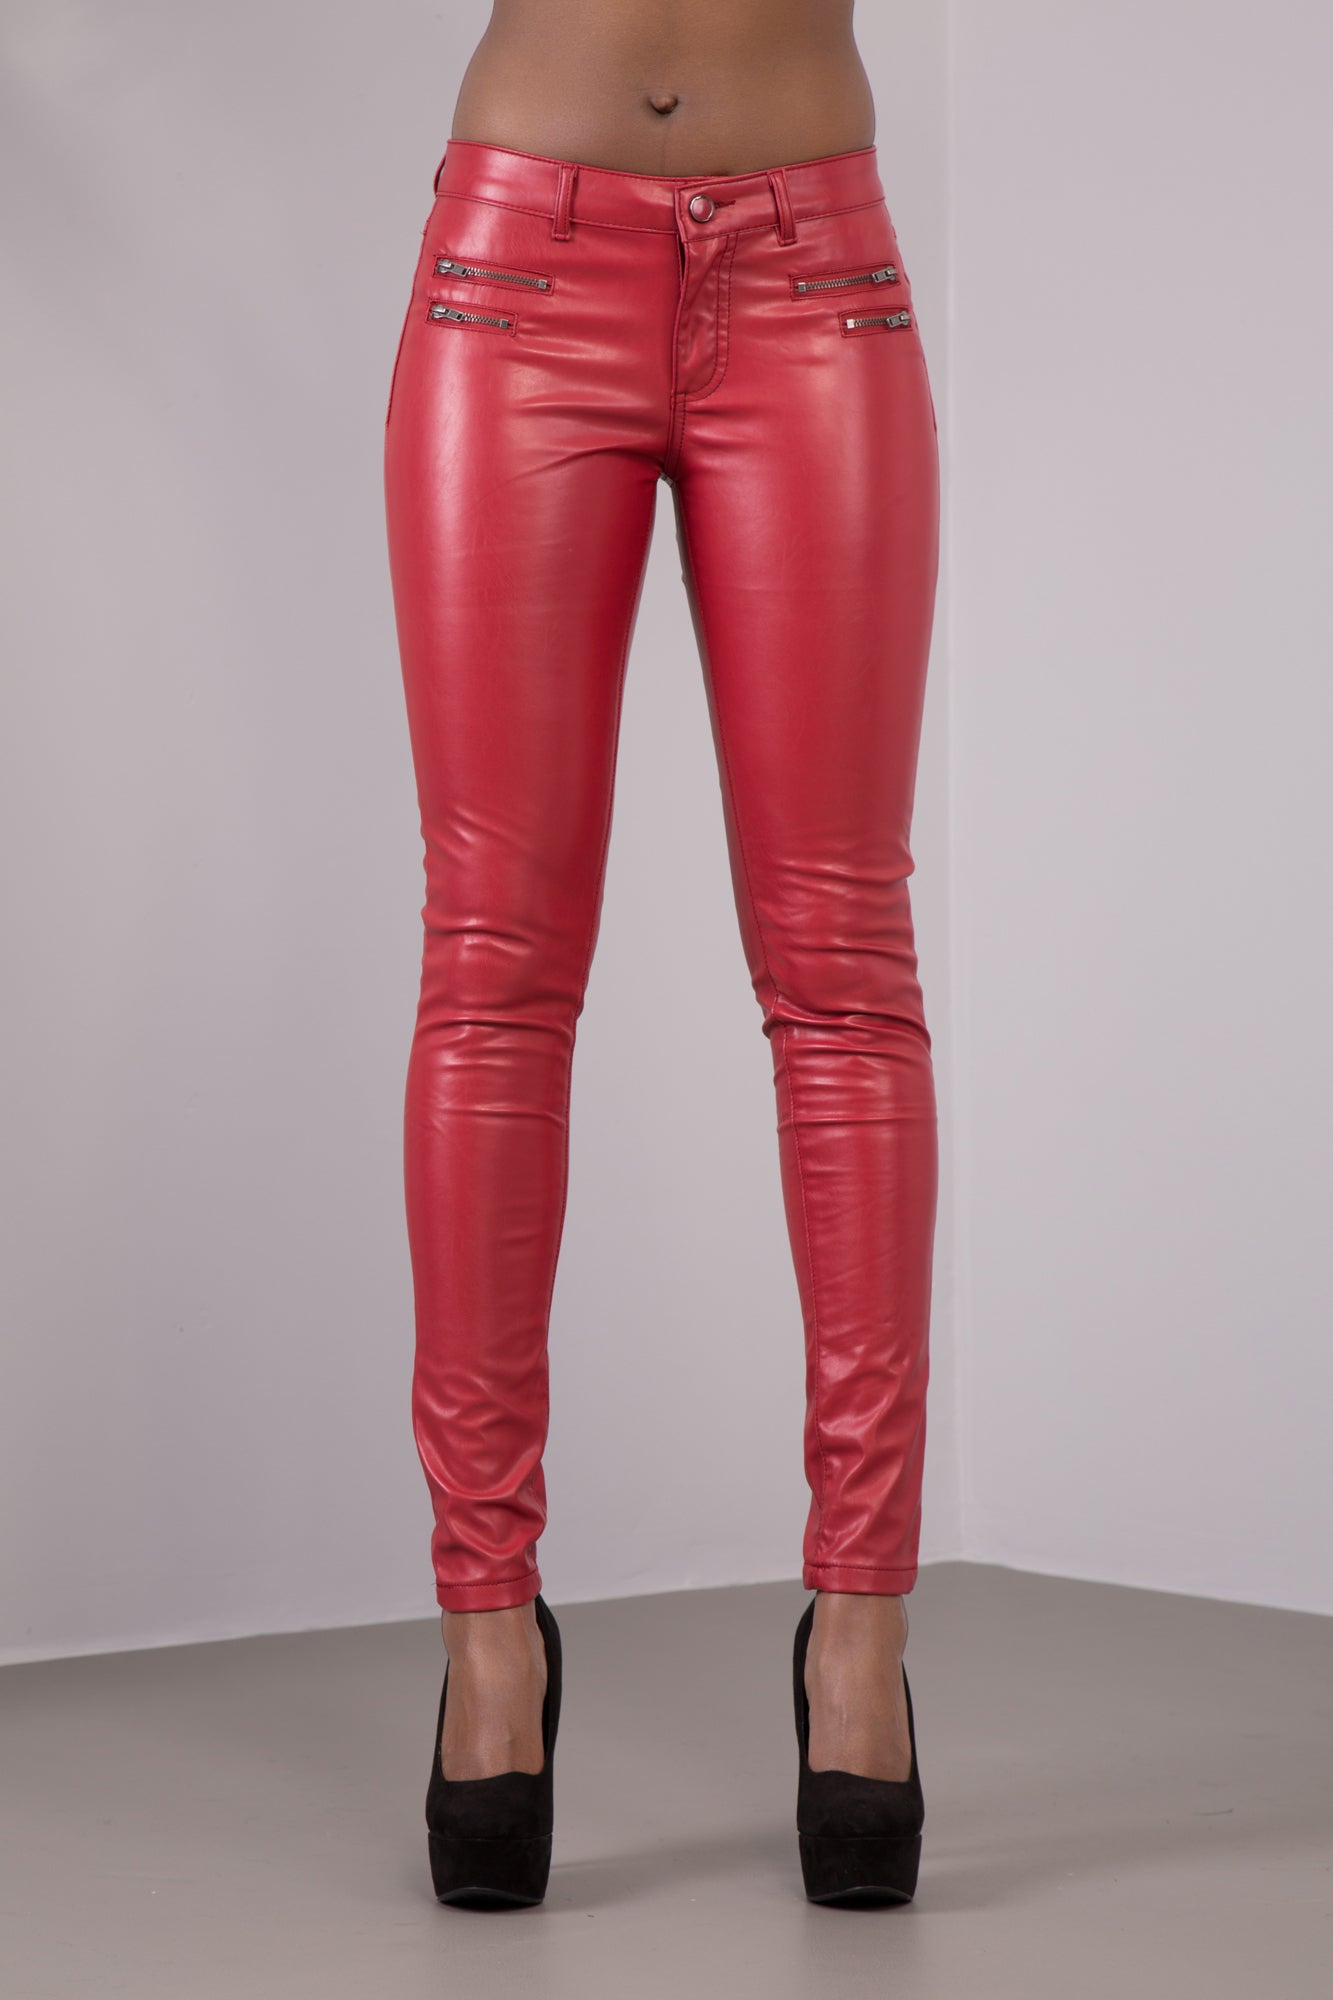 red leather look jeans